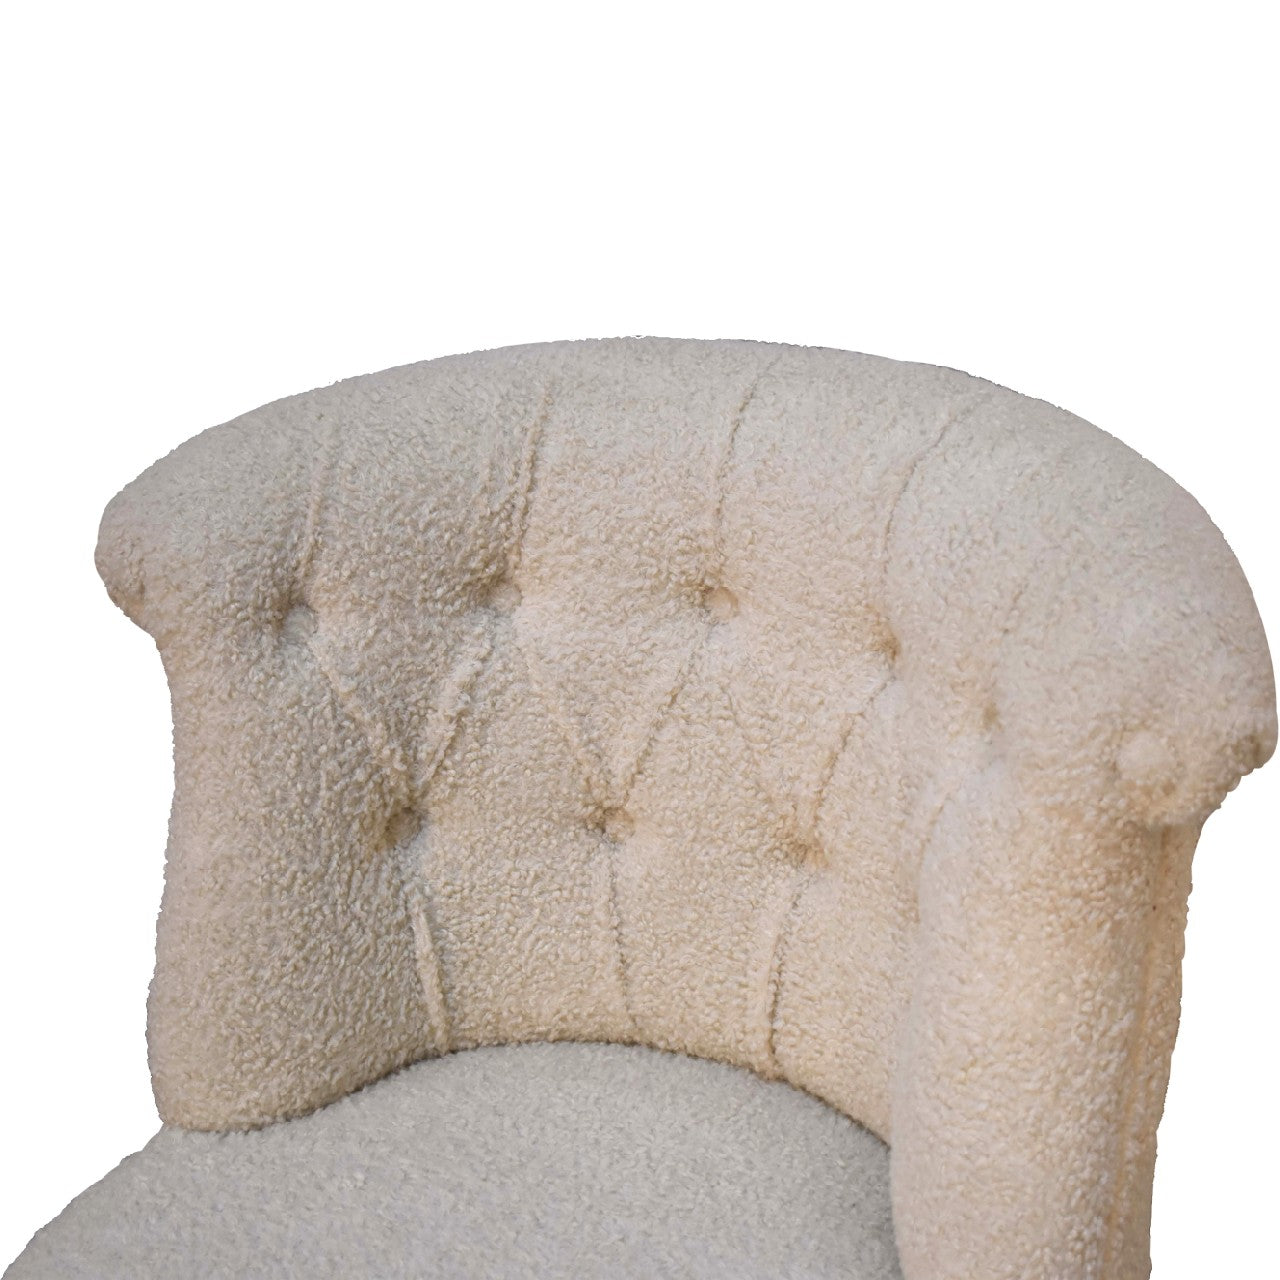 boucle cream accent chair